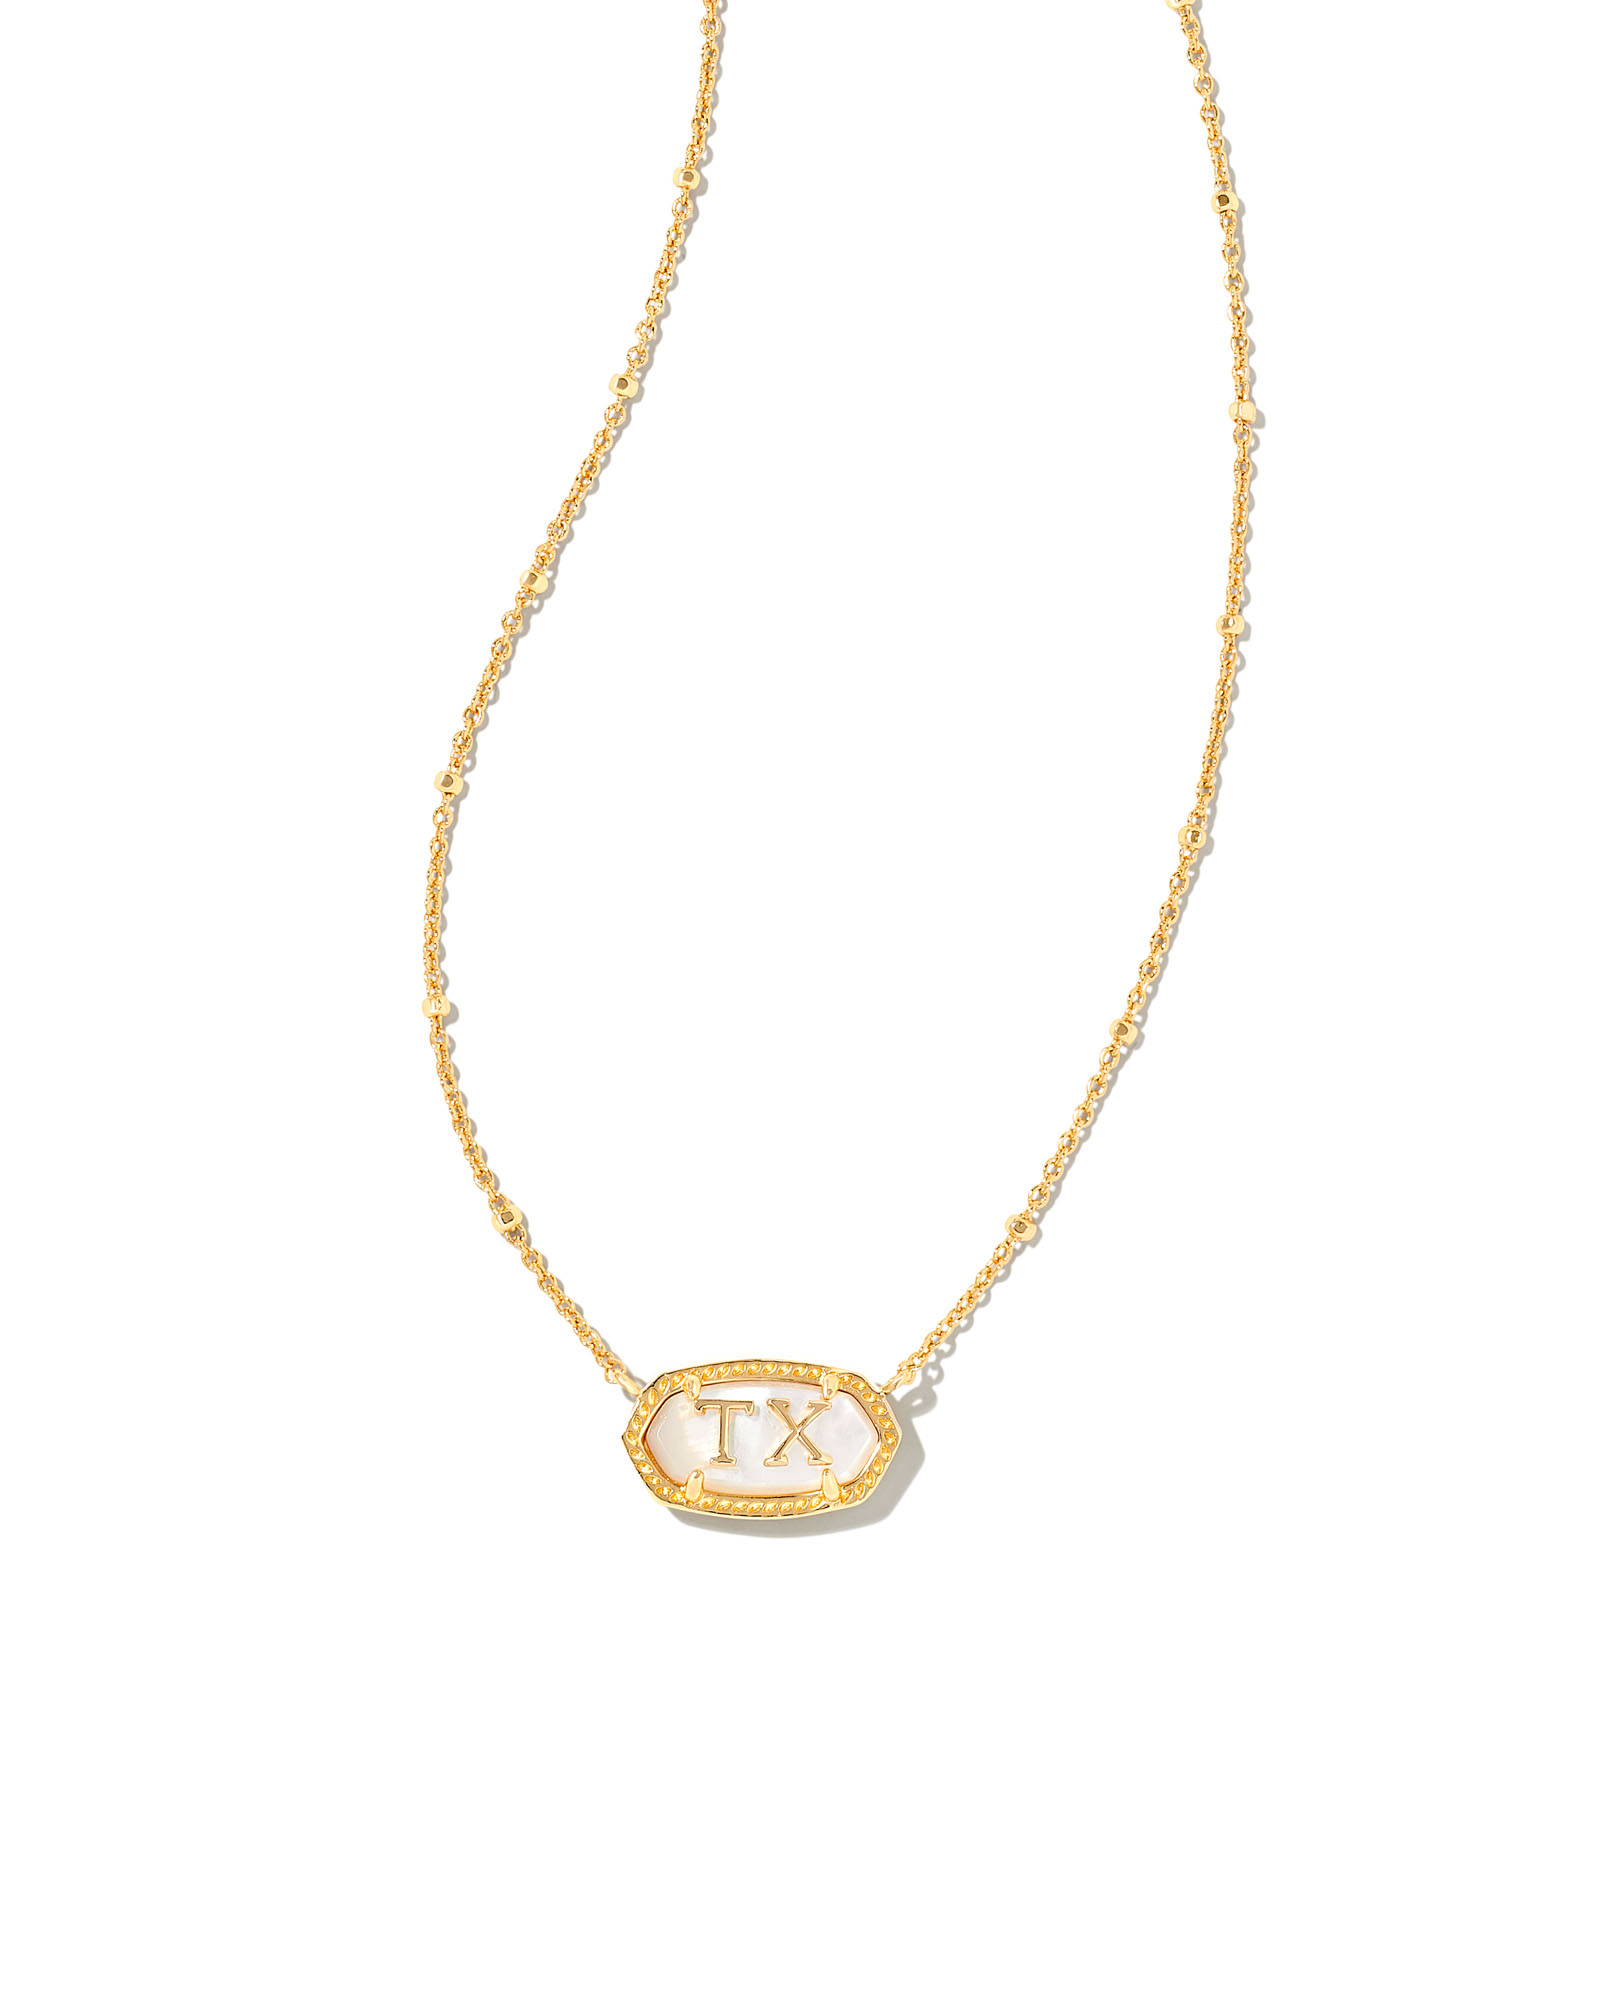 Elisa Gold Texas Necklace in Ivory Mother-of-Pearl | Kendra Scott